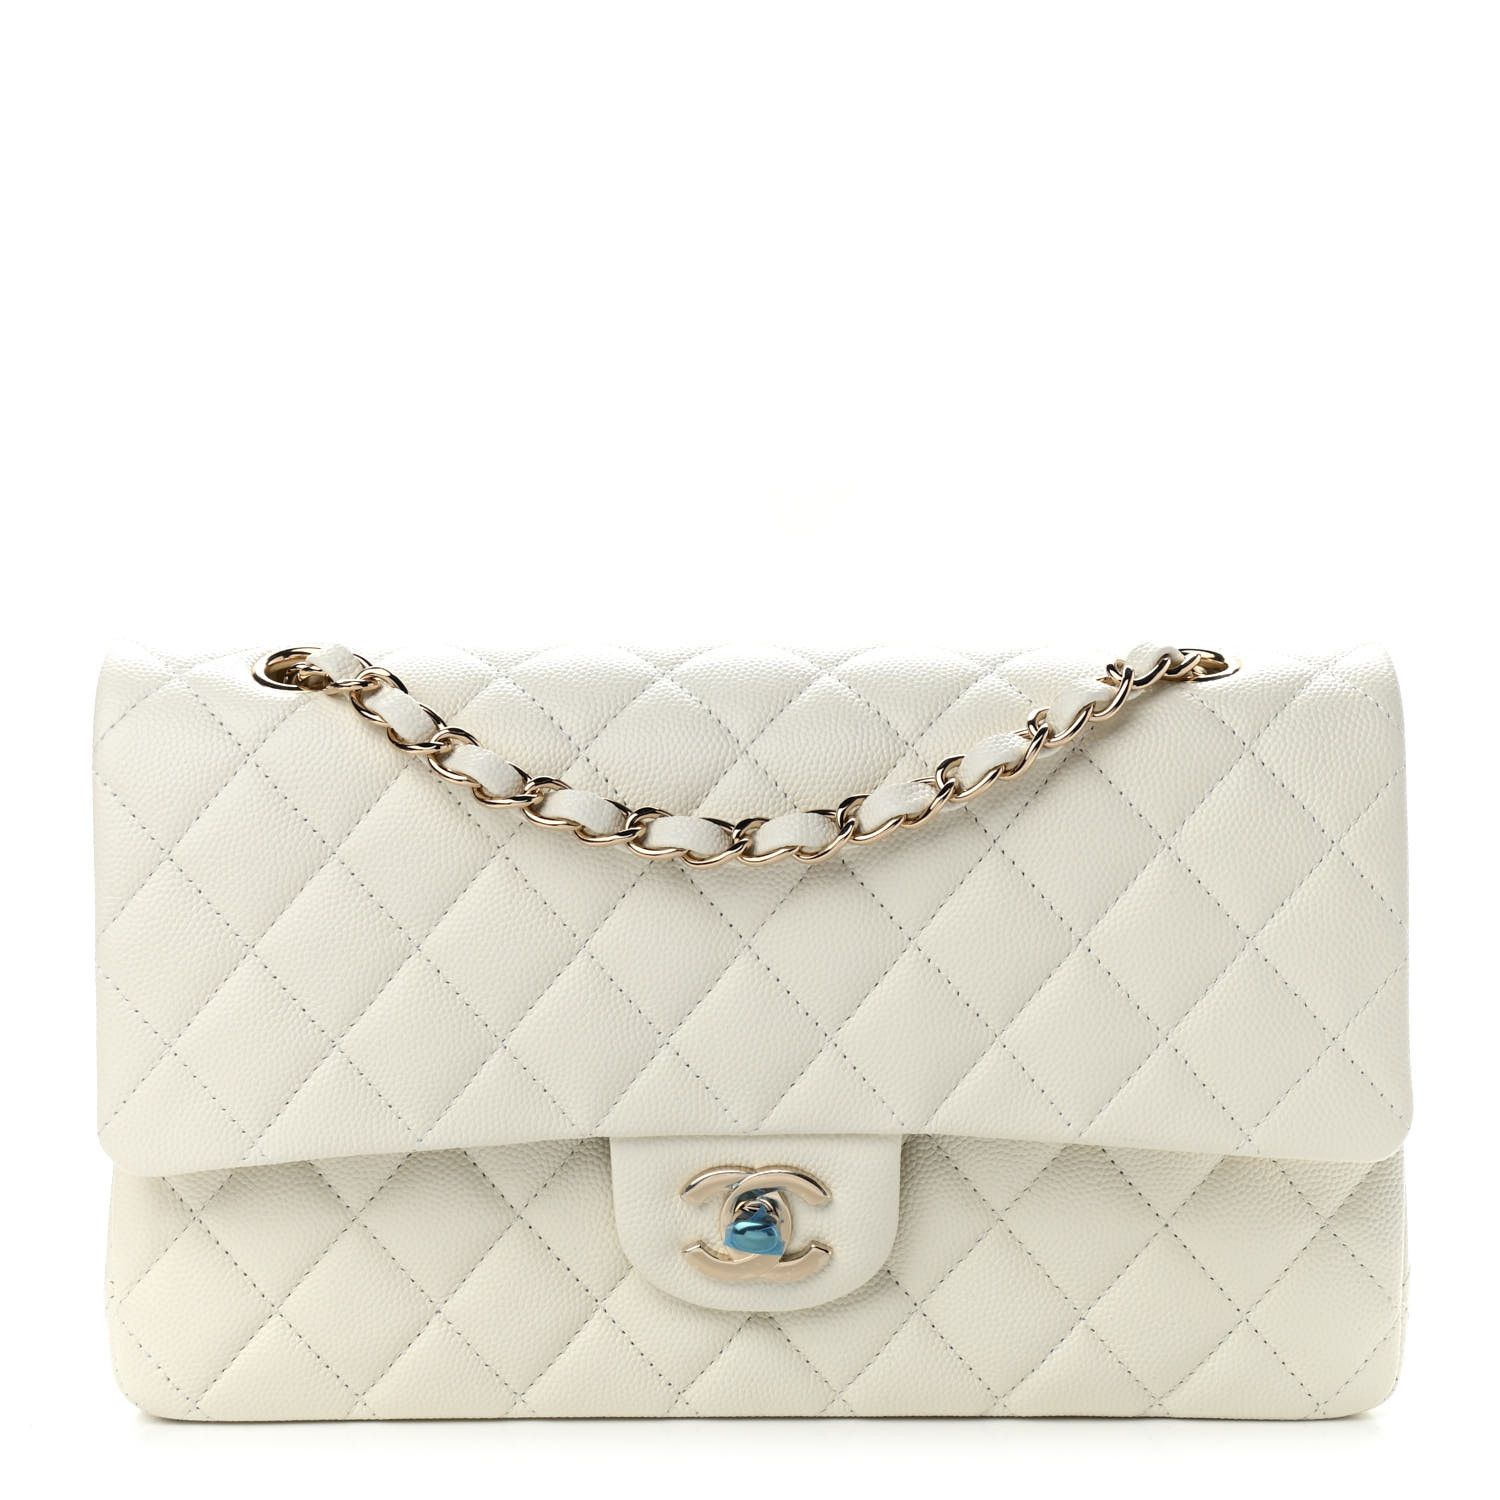 CHANEL Caviar Quilted Medium Double Flap White | FASHIONPHILE | Fashionphile